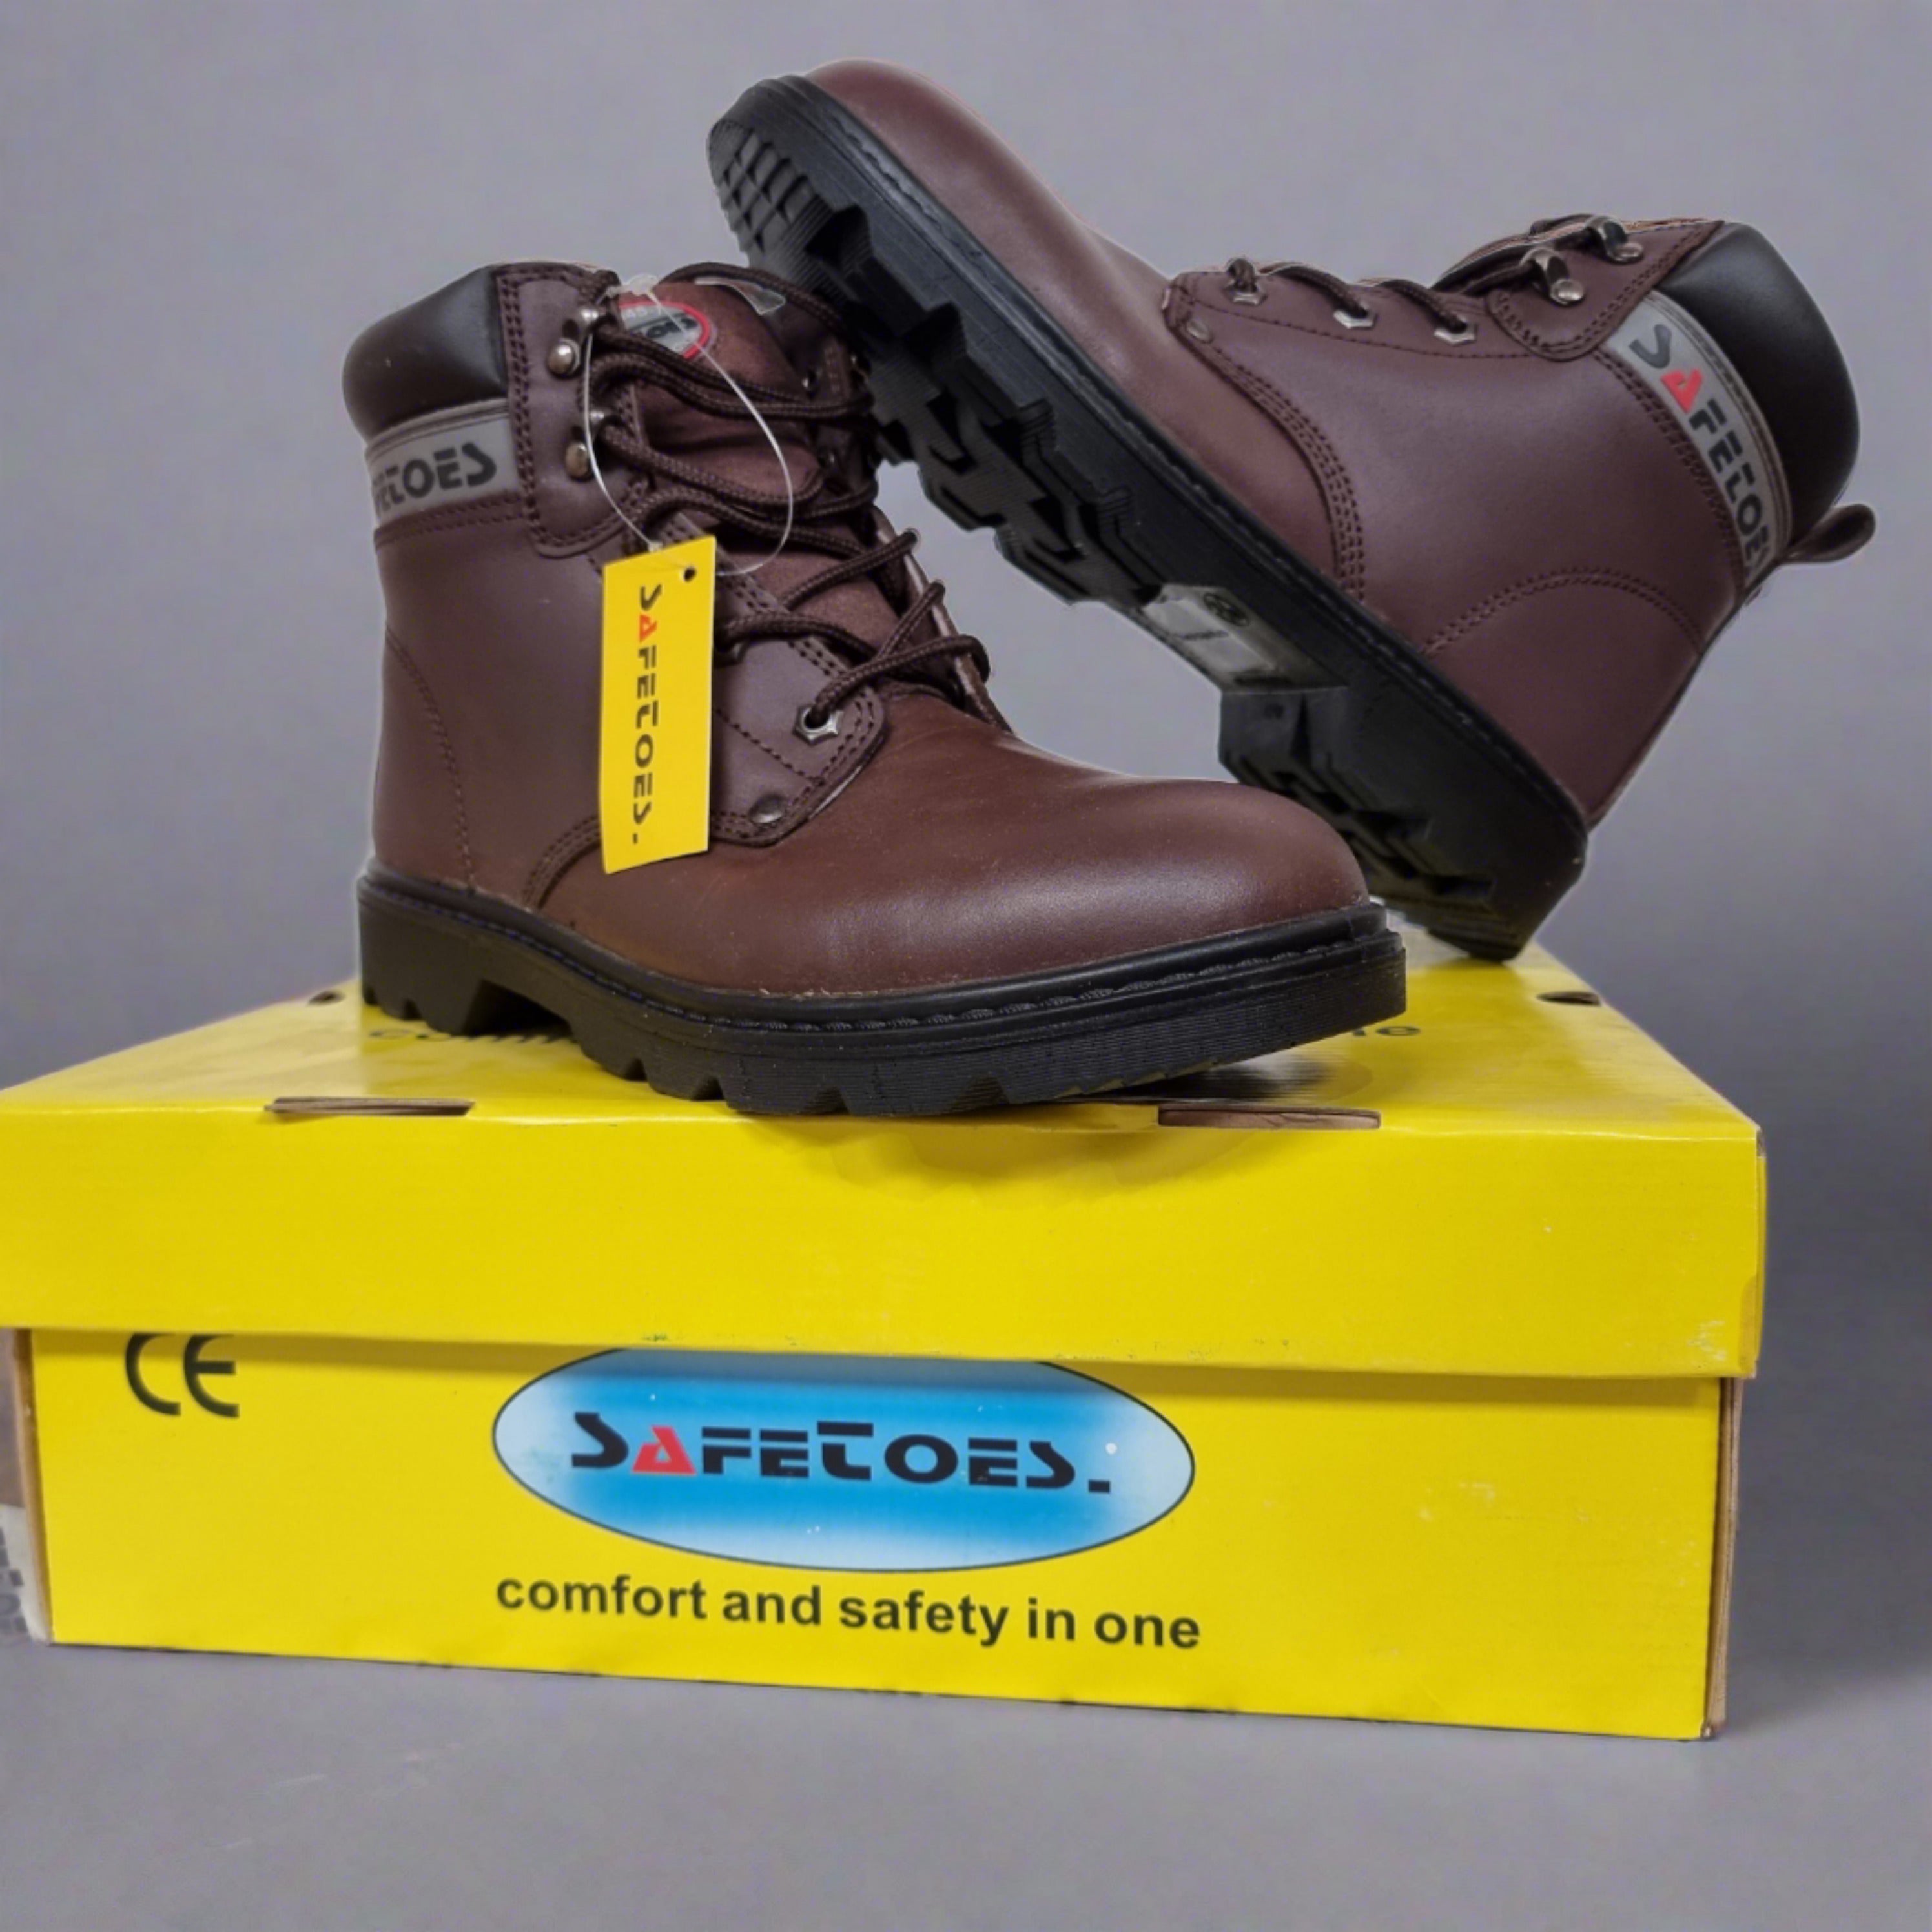 Safetoes S3002 Brown Leather Derby Safety Steel Toe Boots - UK Size 6